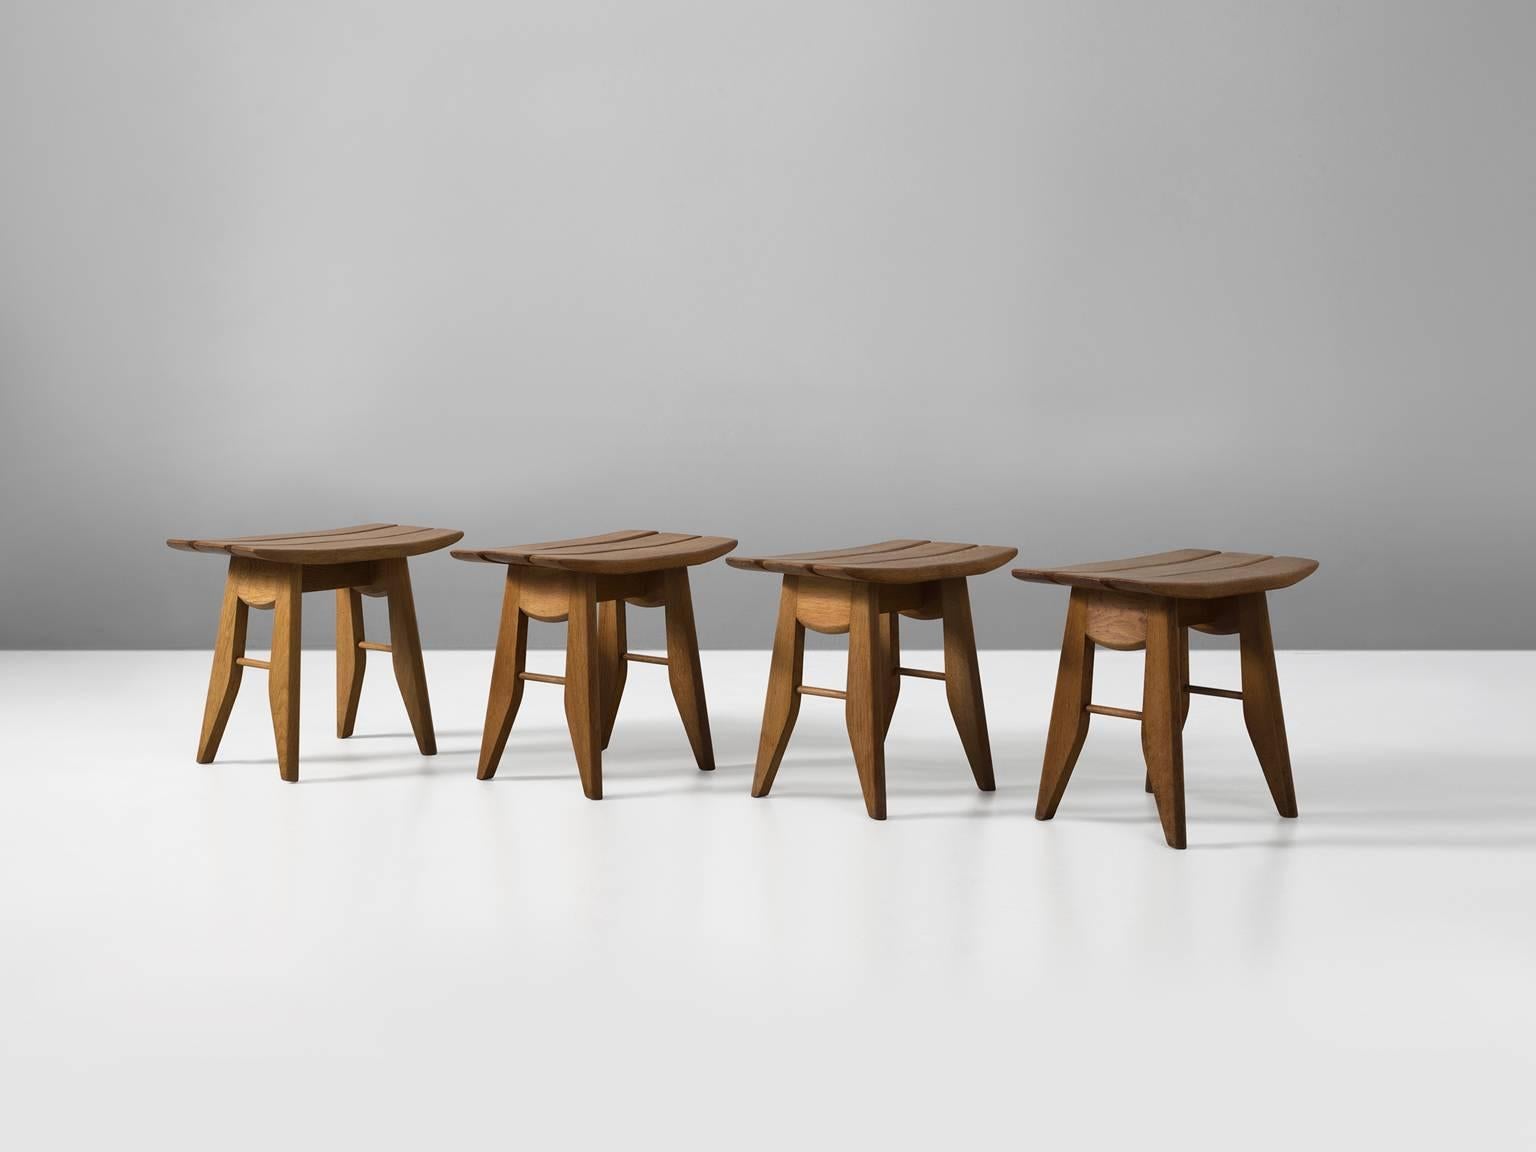 Set of four stools, in oak, by Guillerme et Chambron, France, 1960s.

Set of four tabourets in oak, by French designer duo Guillerme and Chambron. These stools have an interesting appearance. The top is made of three slats, the two on the outside